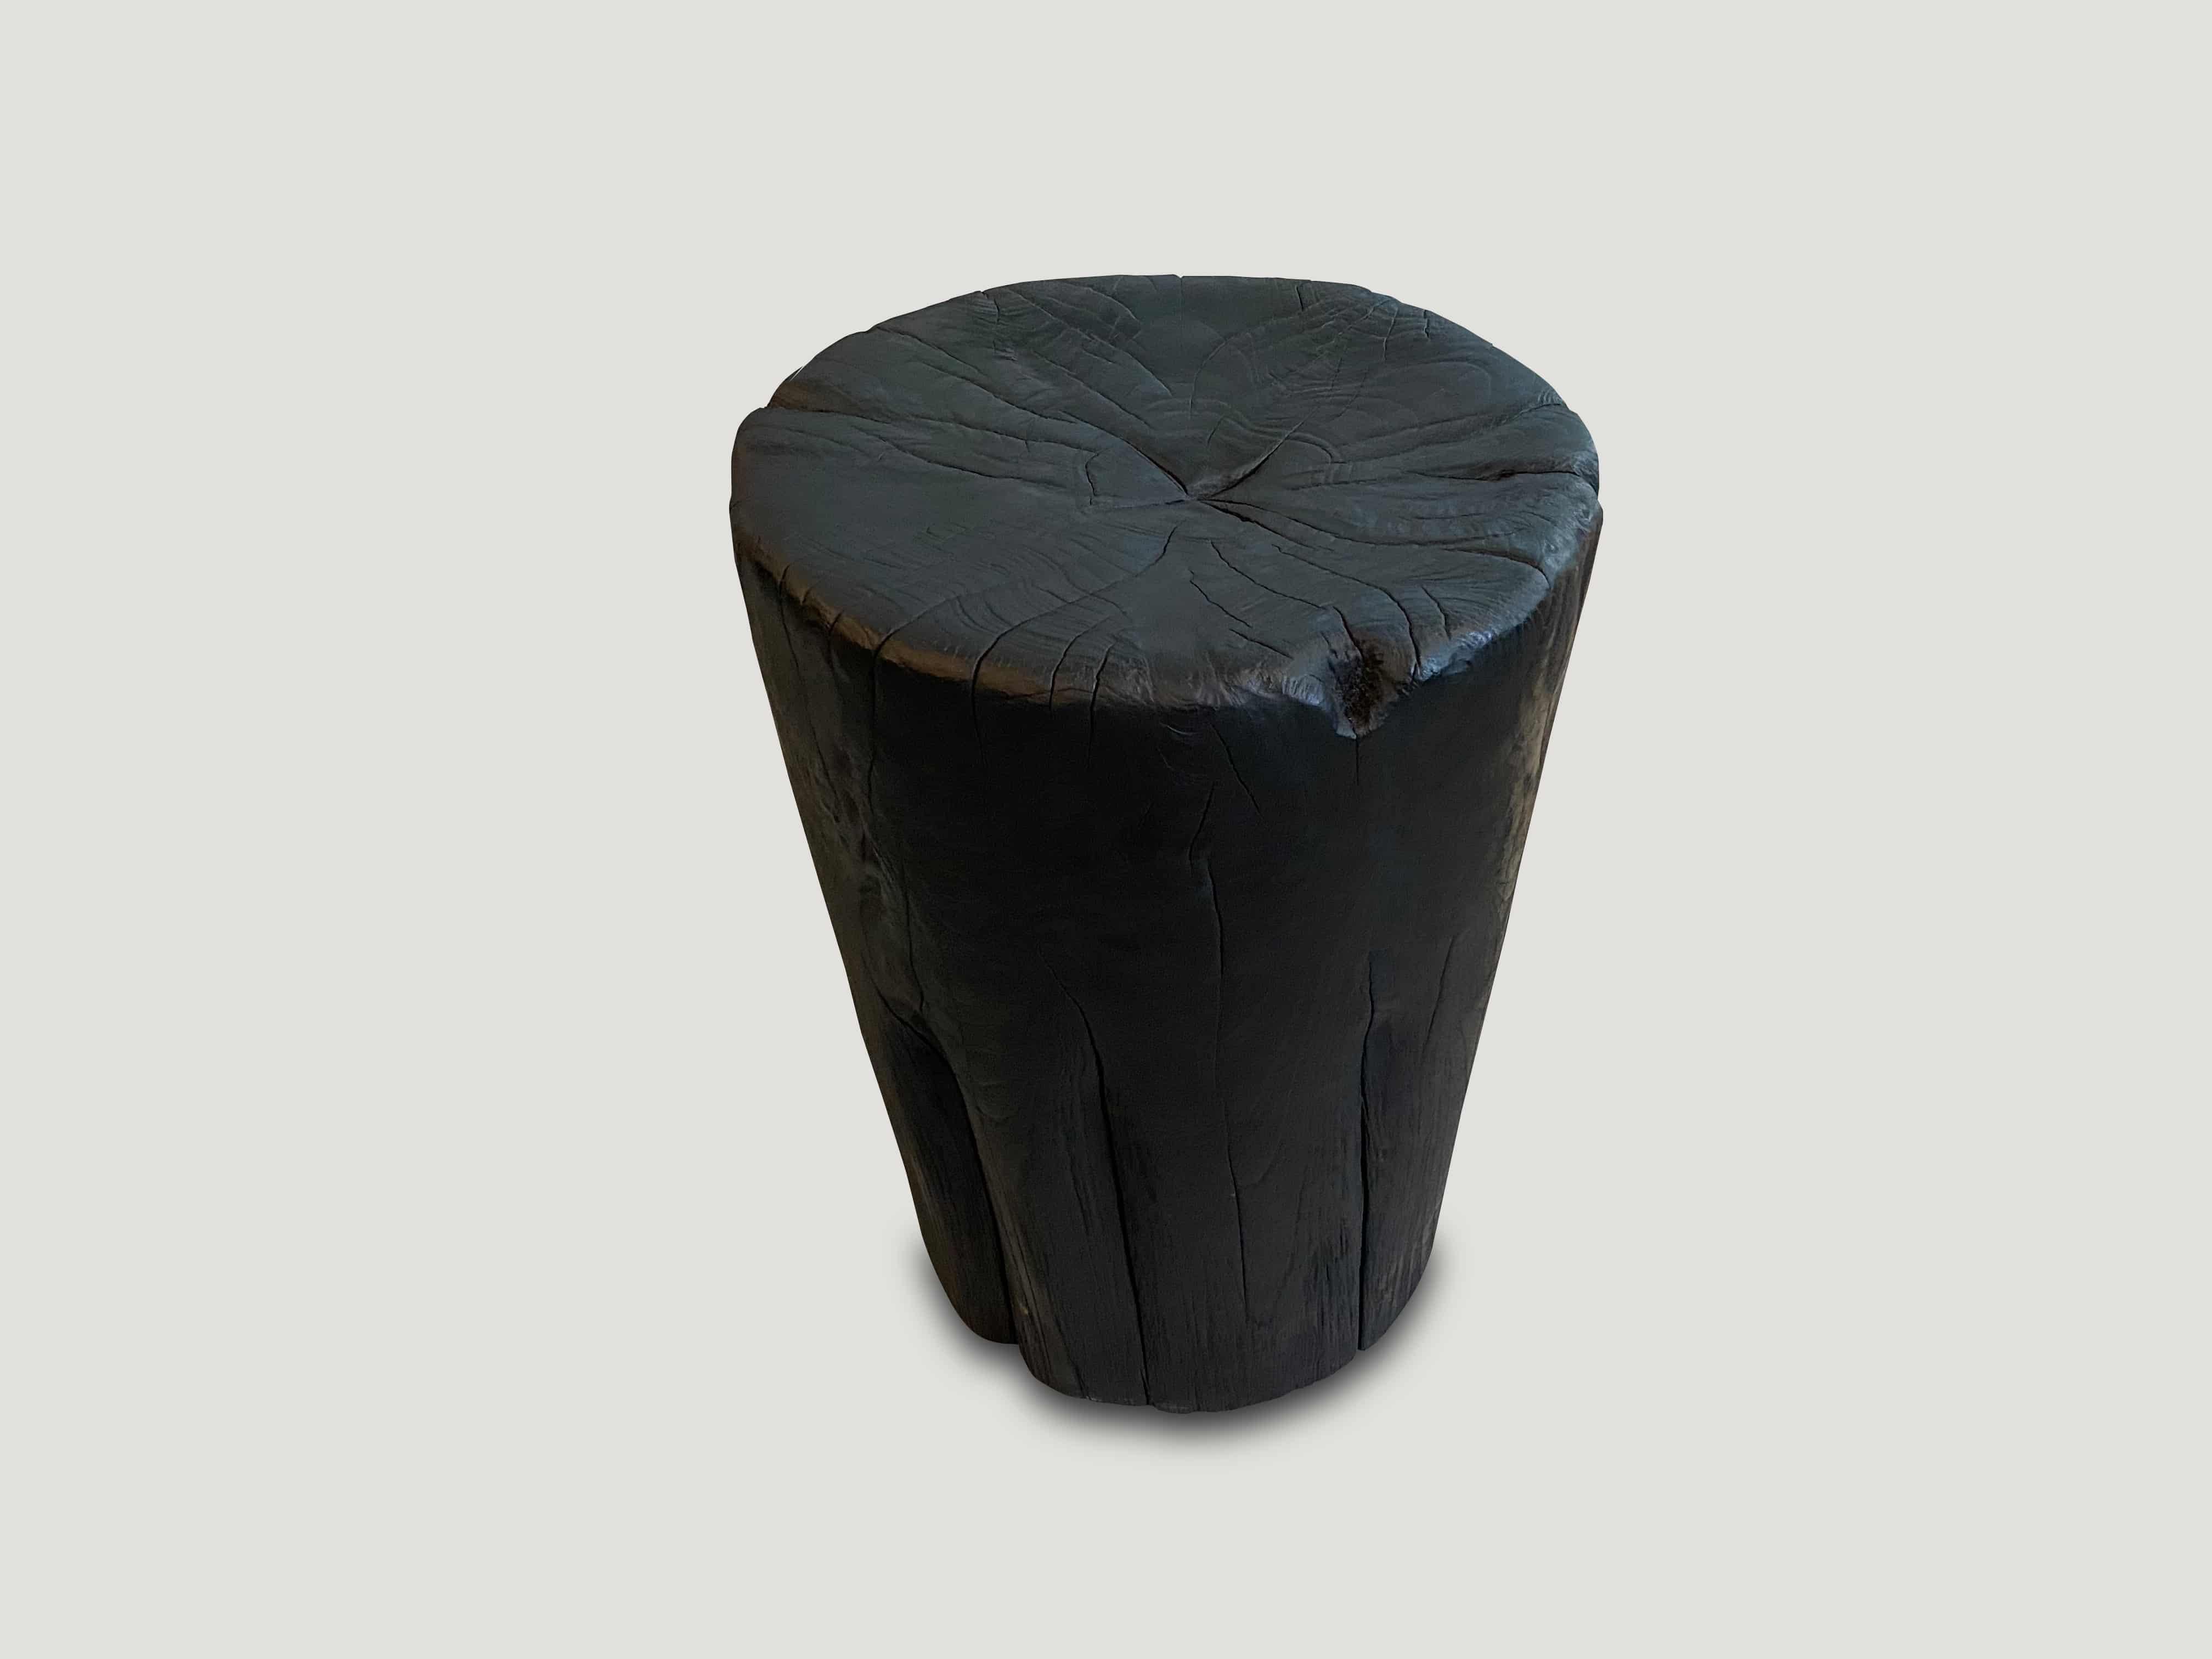 Reclaimed teak wood side table or stool. Hand carved into a drum shape whilst respecting the natural organic wood. Charred, sanded and sealed revealing the beautiful wood grain. Also available bleached.

The Triple Burnt Collection represents a